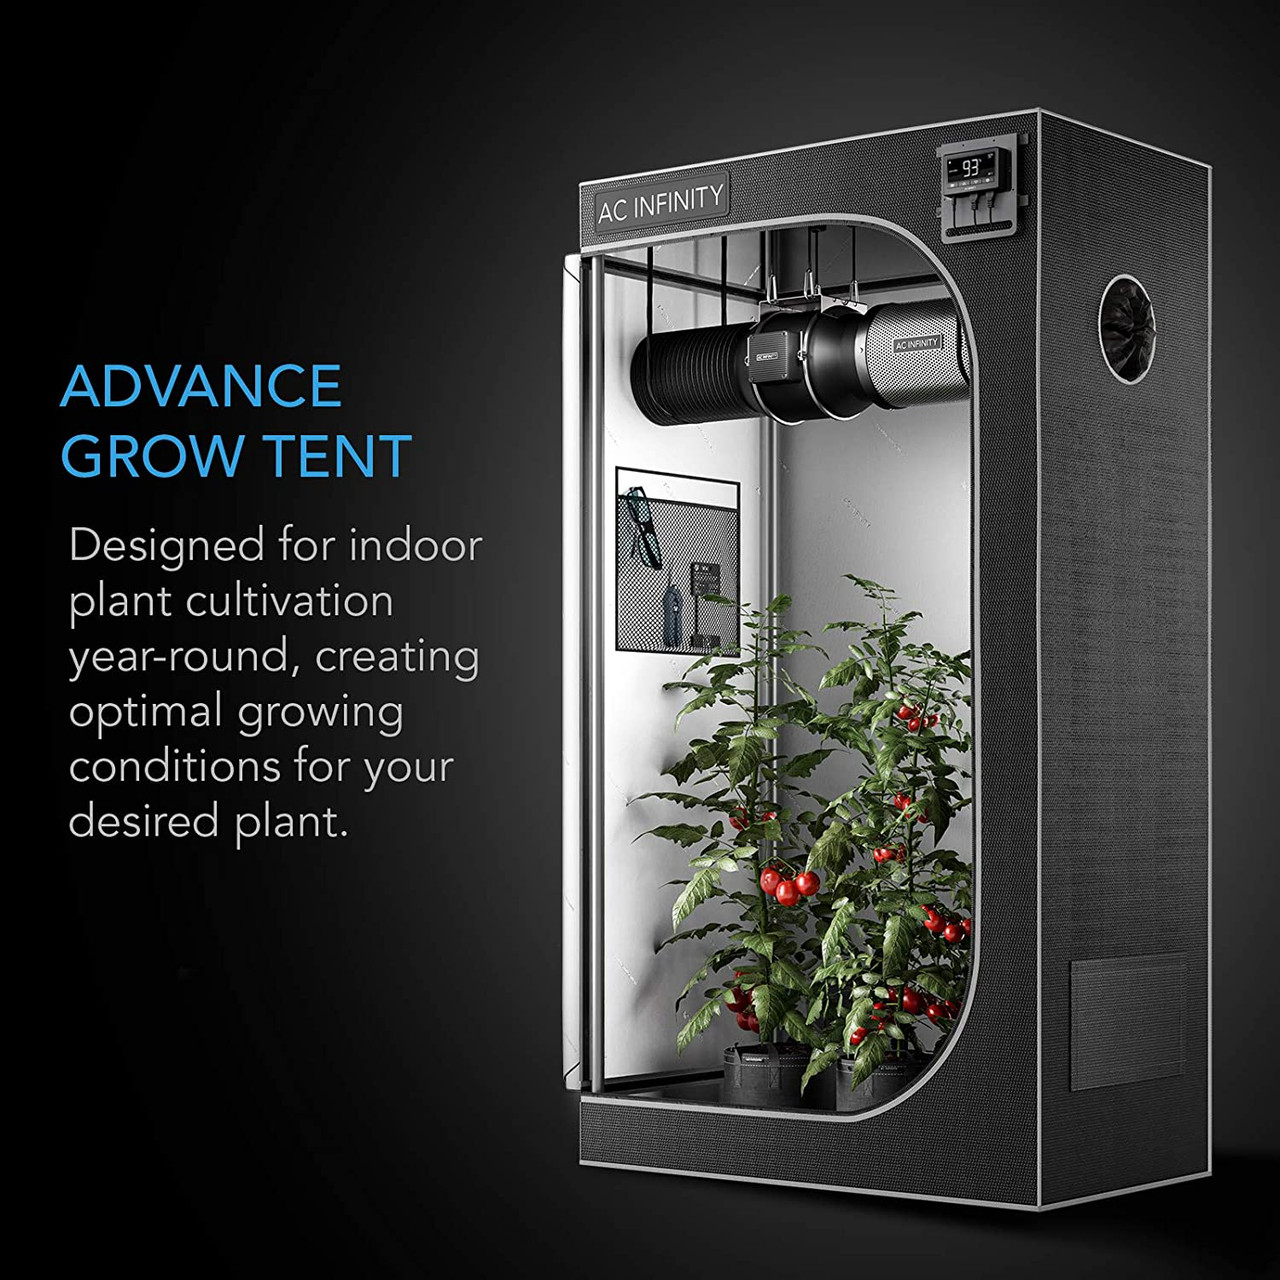 AC Infinity CLOUDLAB 866 Advance Grow Tent, 5x5 with Thicker 1 in. Poles,  Higher Density 2000D Diamond Mylar Canvas, Controller Mount for Hydroponics  Indoor Growing, 60” x 60” x 80” - Greener Gardens